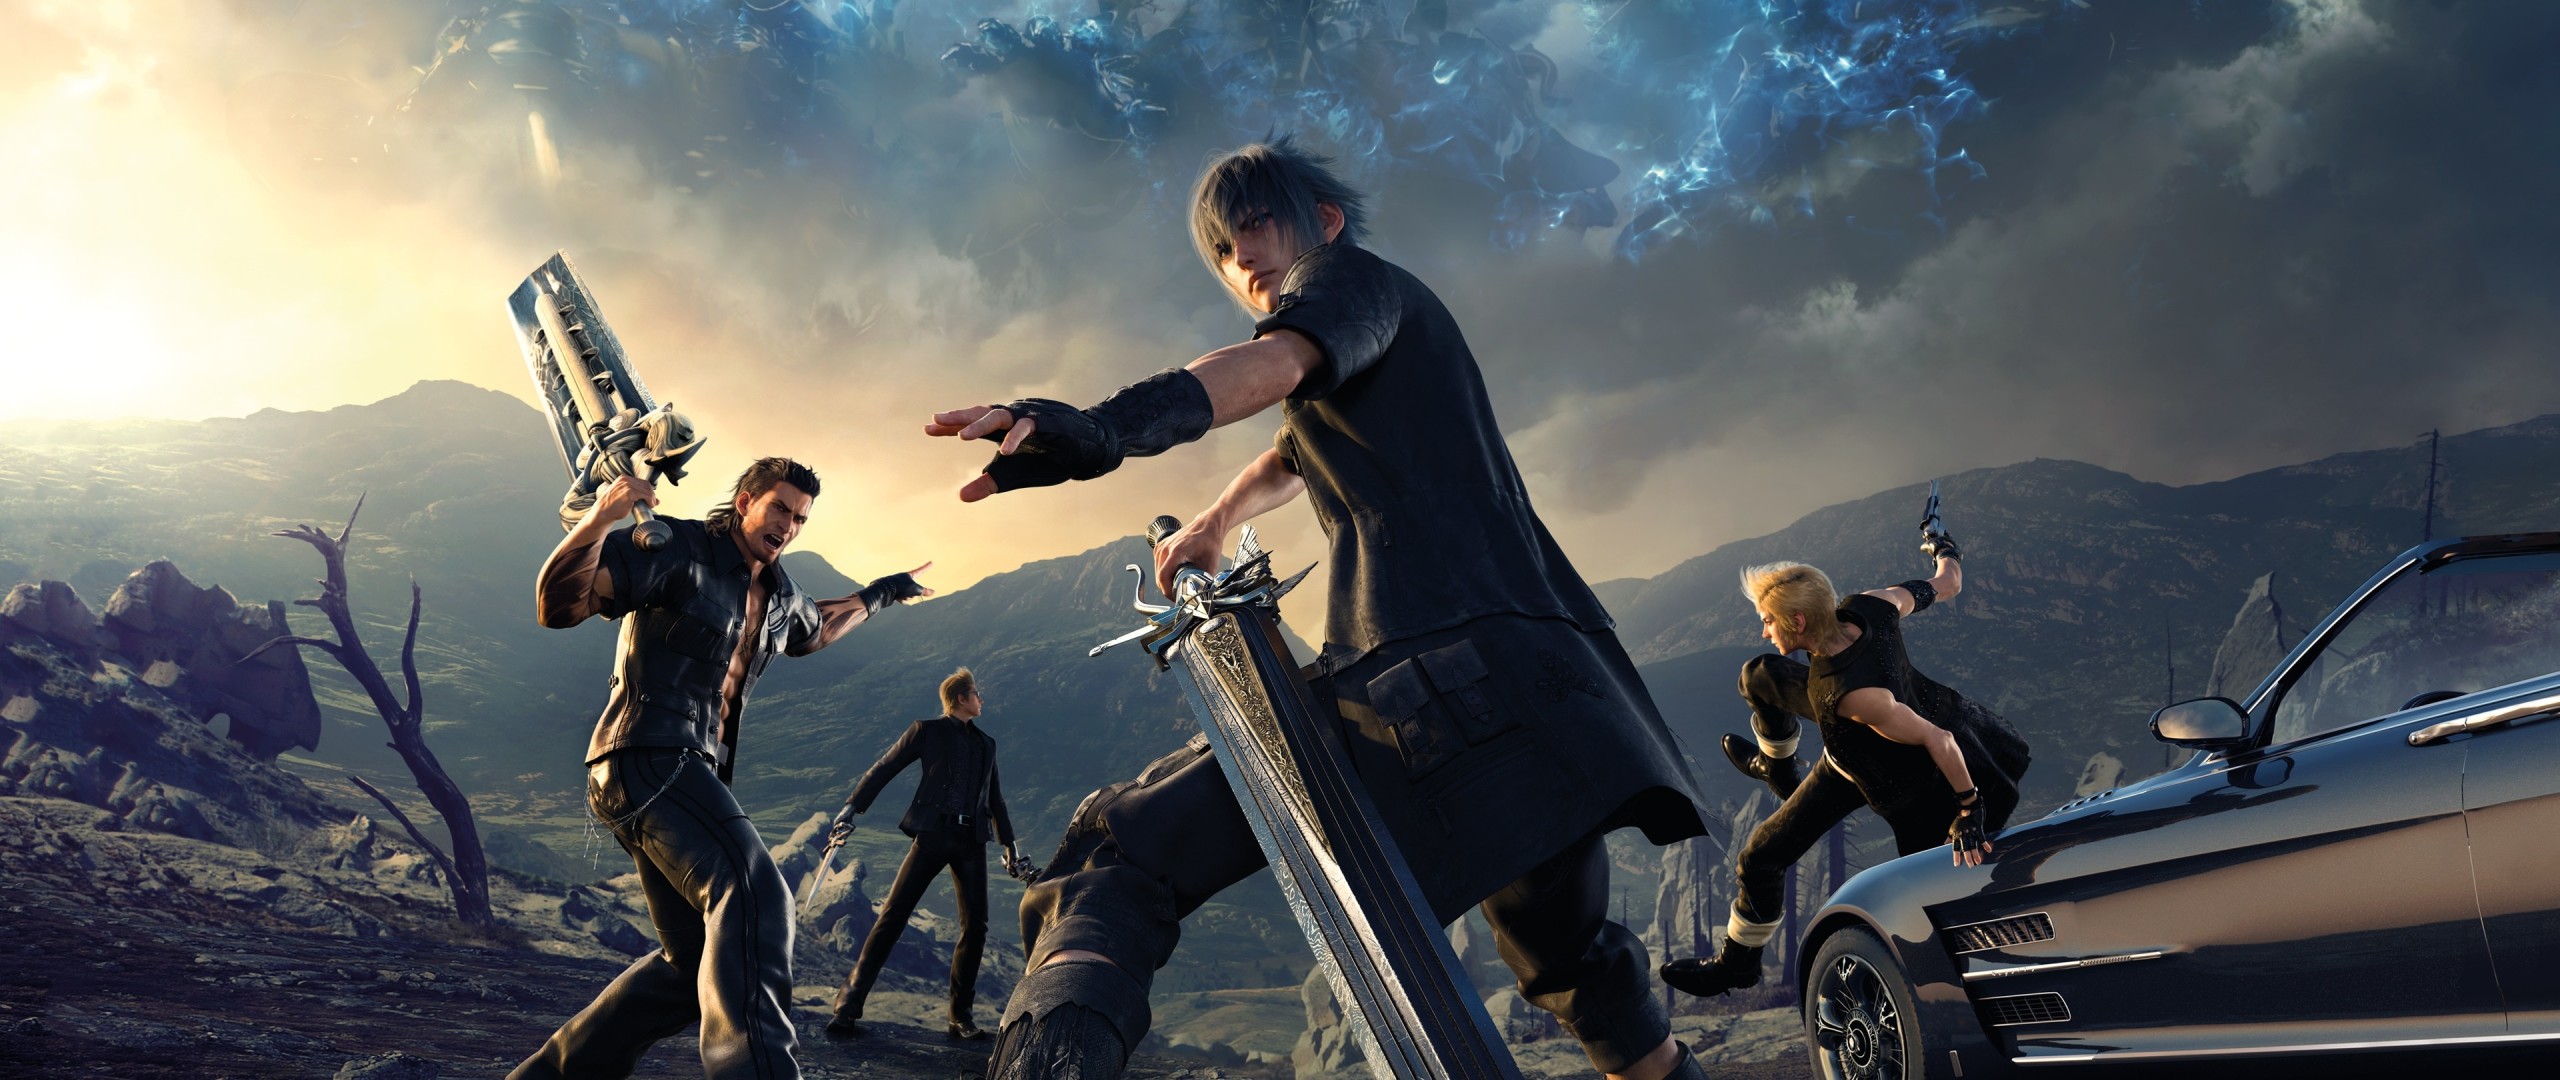 final fantasy xv wallpaper,movie,fictional character,action film,action adventure game,games